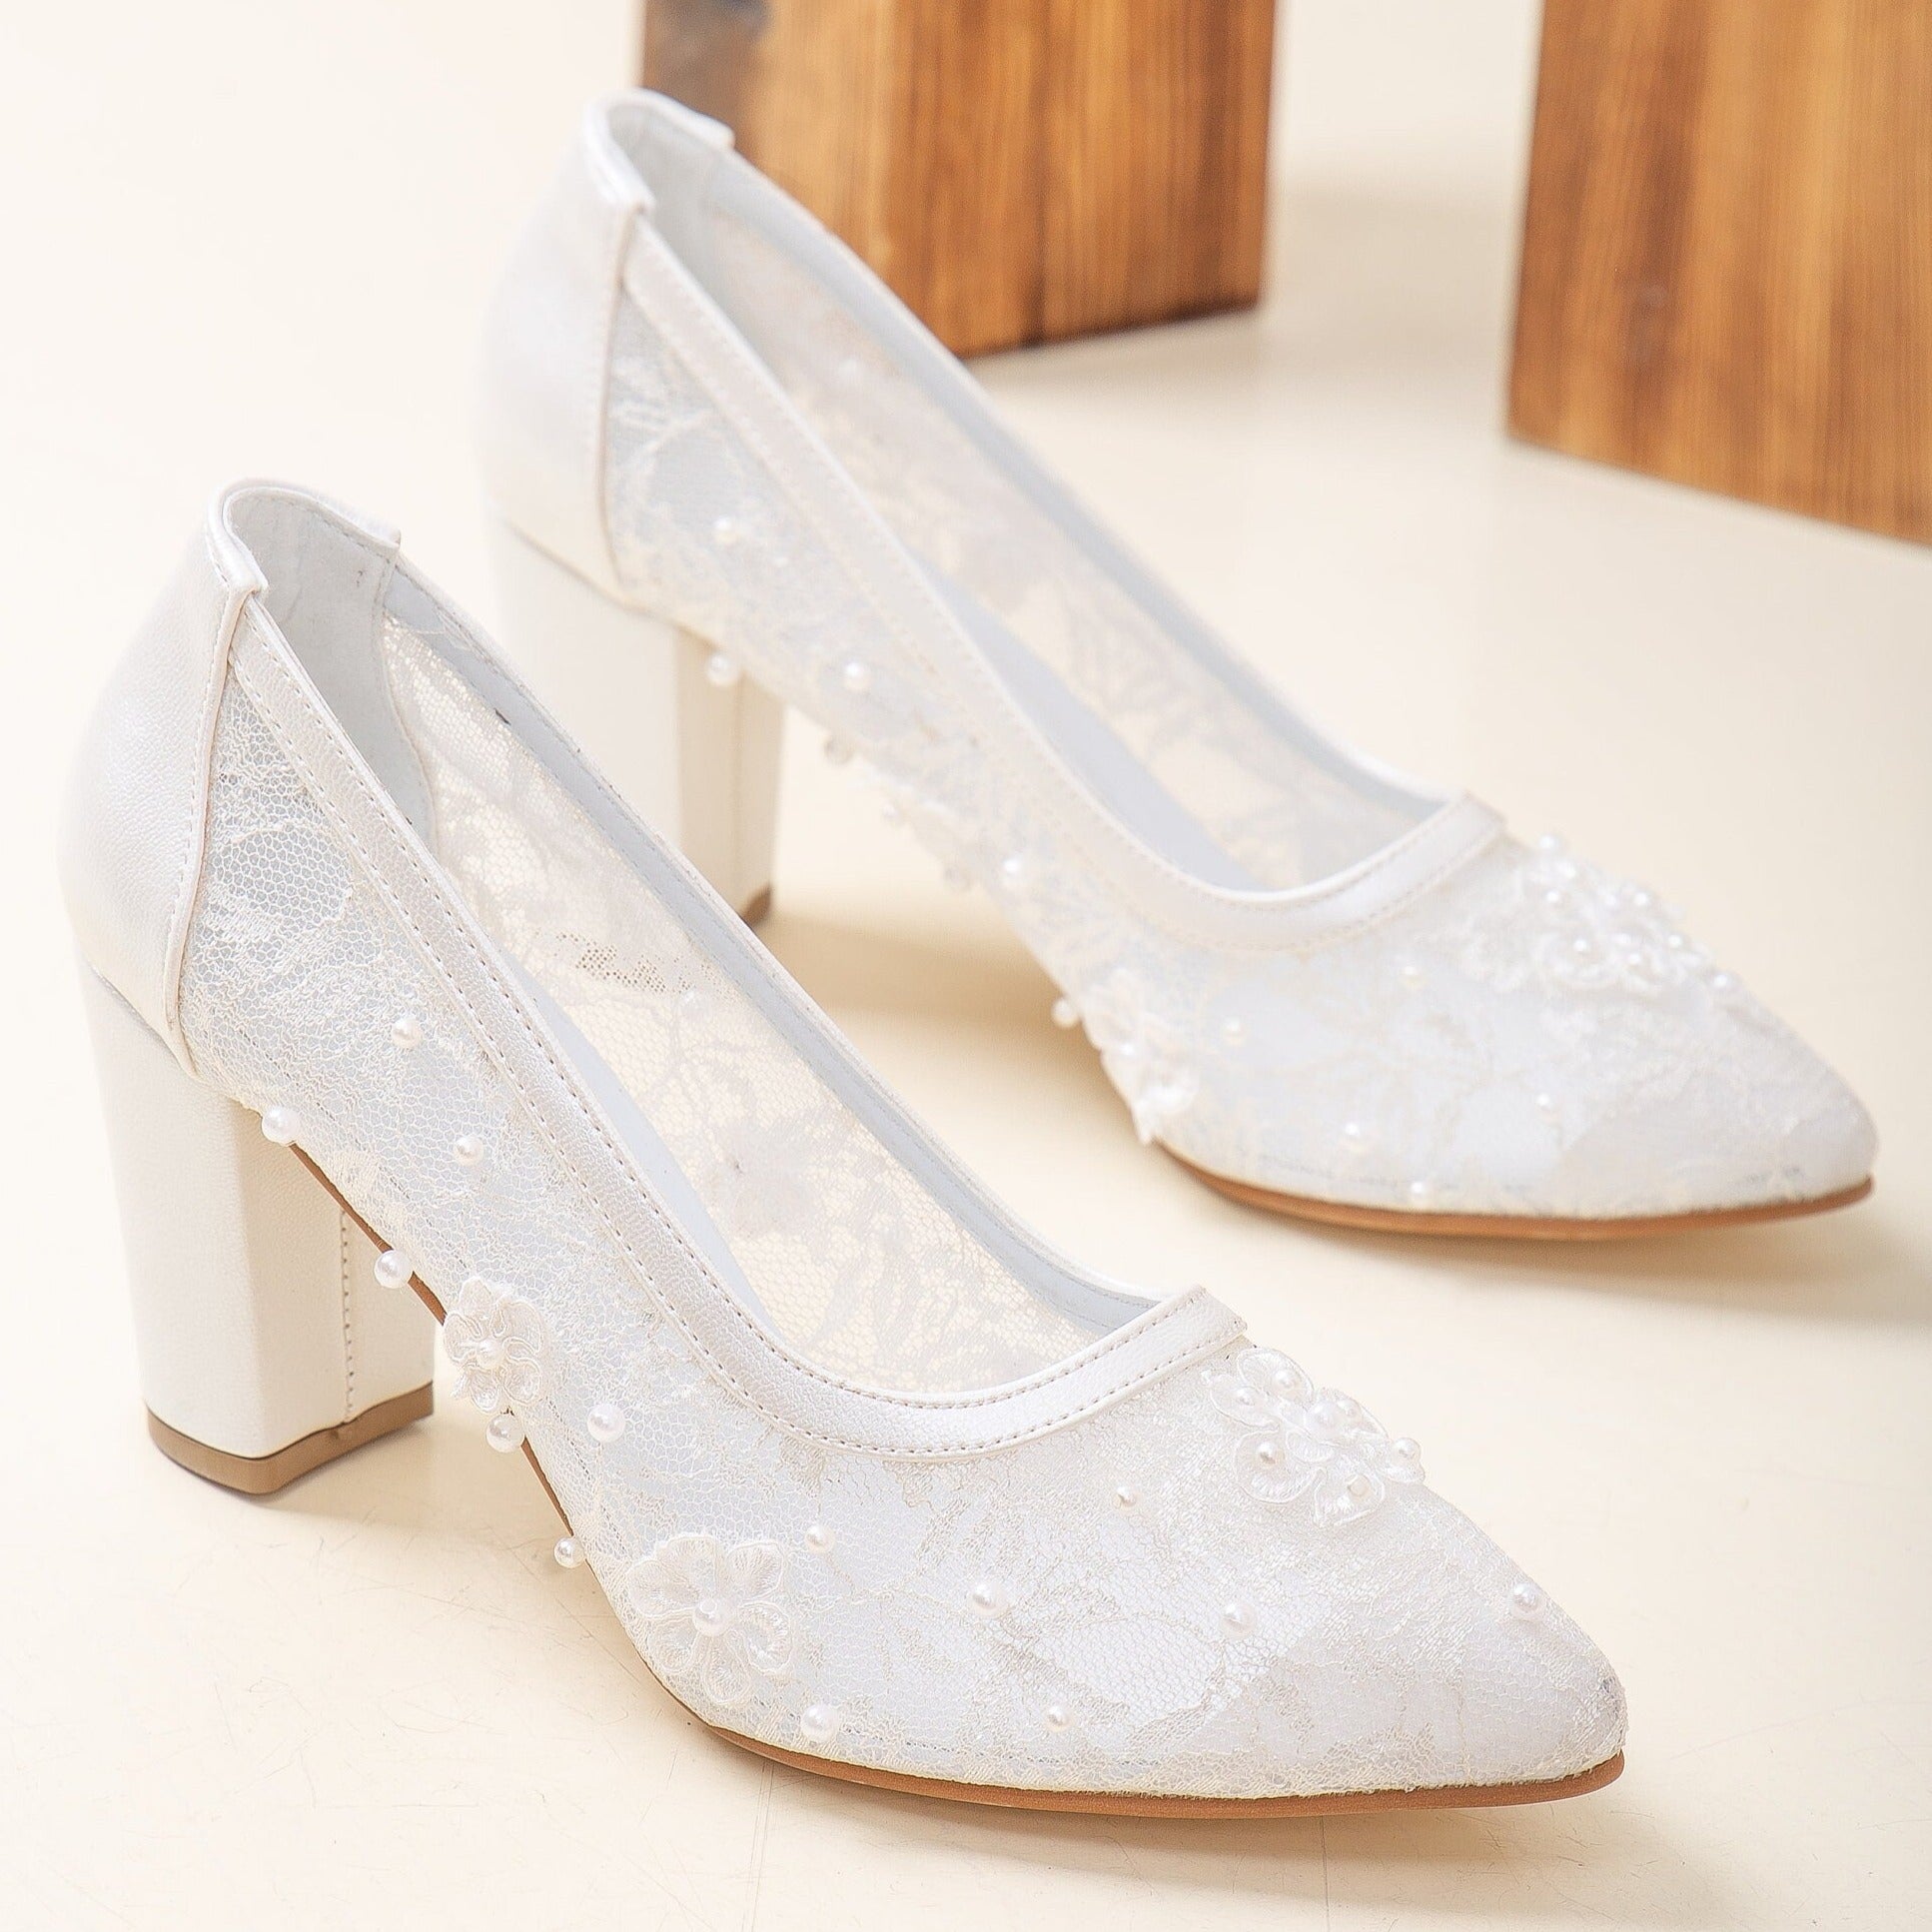 Wedding Shoes, Lace Wedding Heels, Shoes for Bride, Lace Bridal Heels, Tulle Wedding Shoes, Bride Shoes, Ivory Wedding Shoes, Bridal Heels